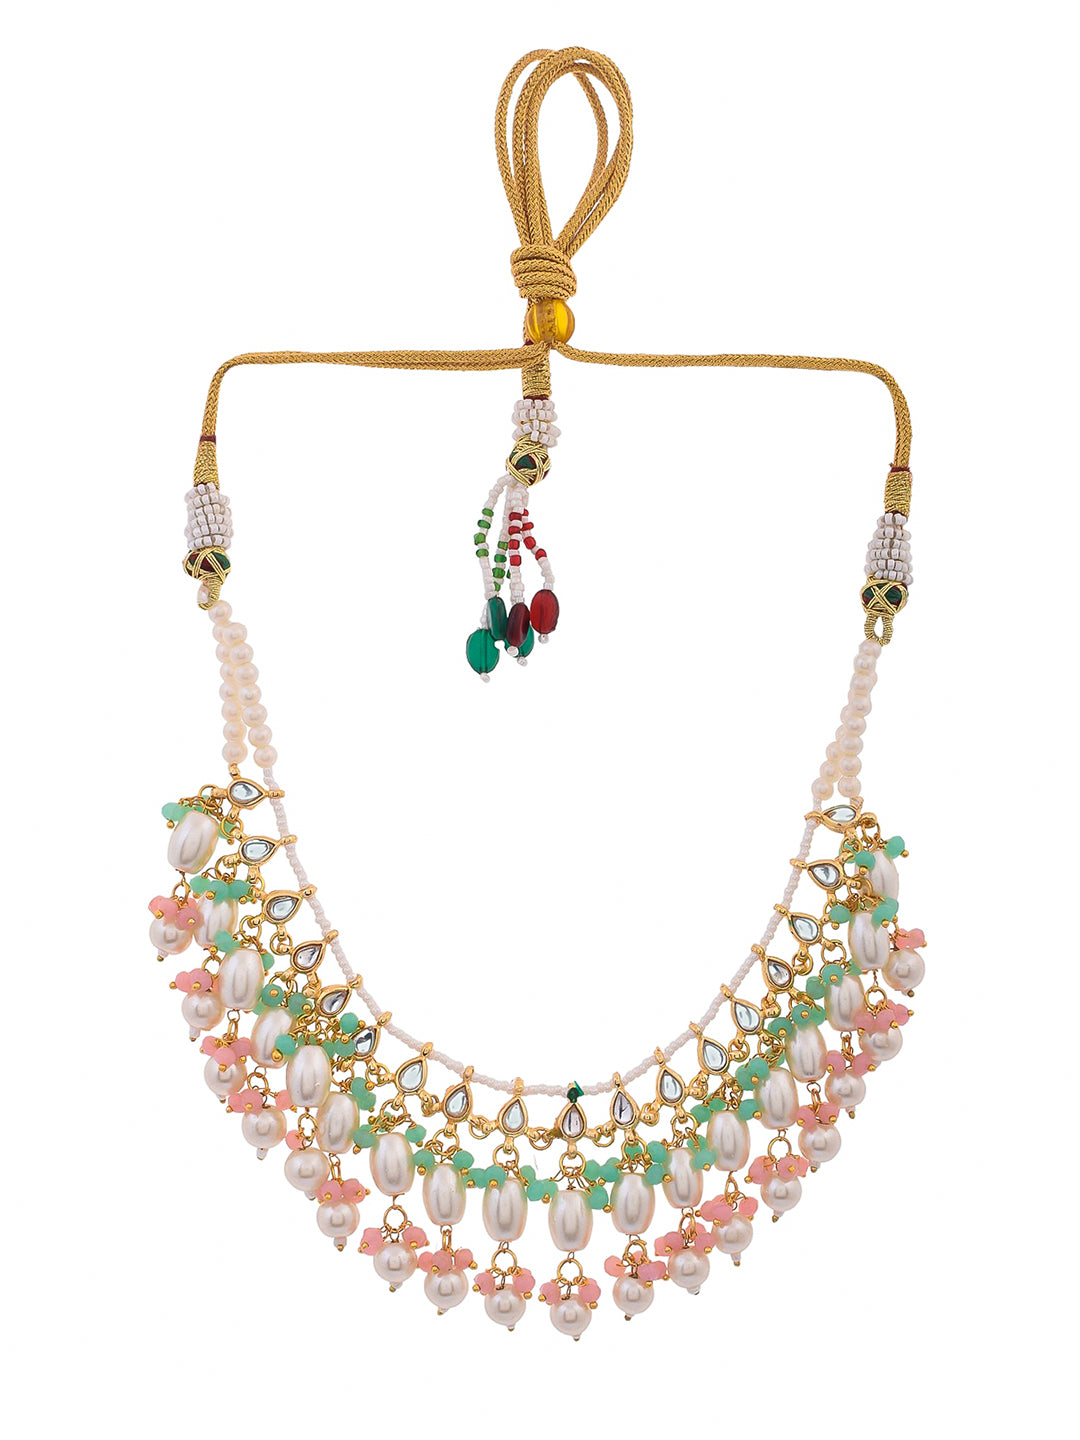 this handcrafted pink beaded with pearl jewellery set is a must-have for every woman or girl. Made with high-quality materials, this stunning set adds sophistication to any outfit. Perfect for any occasion